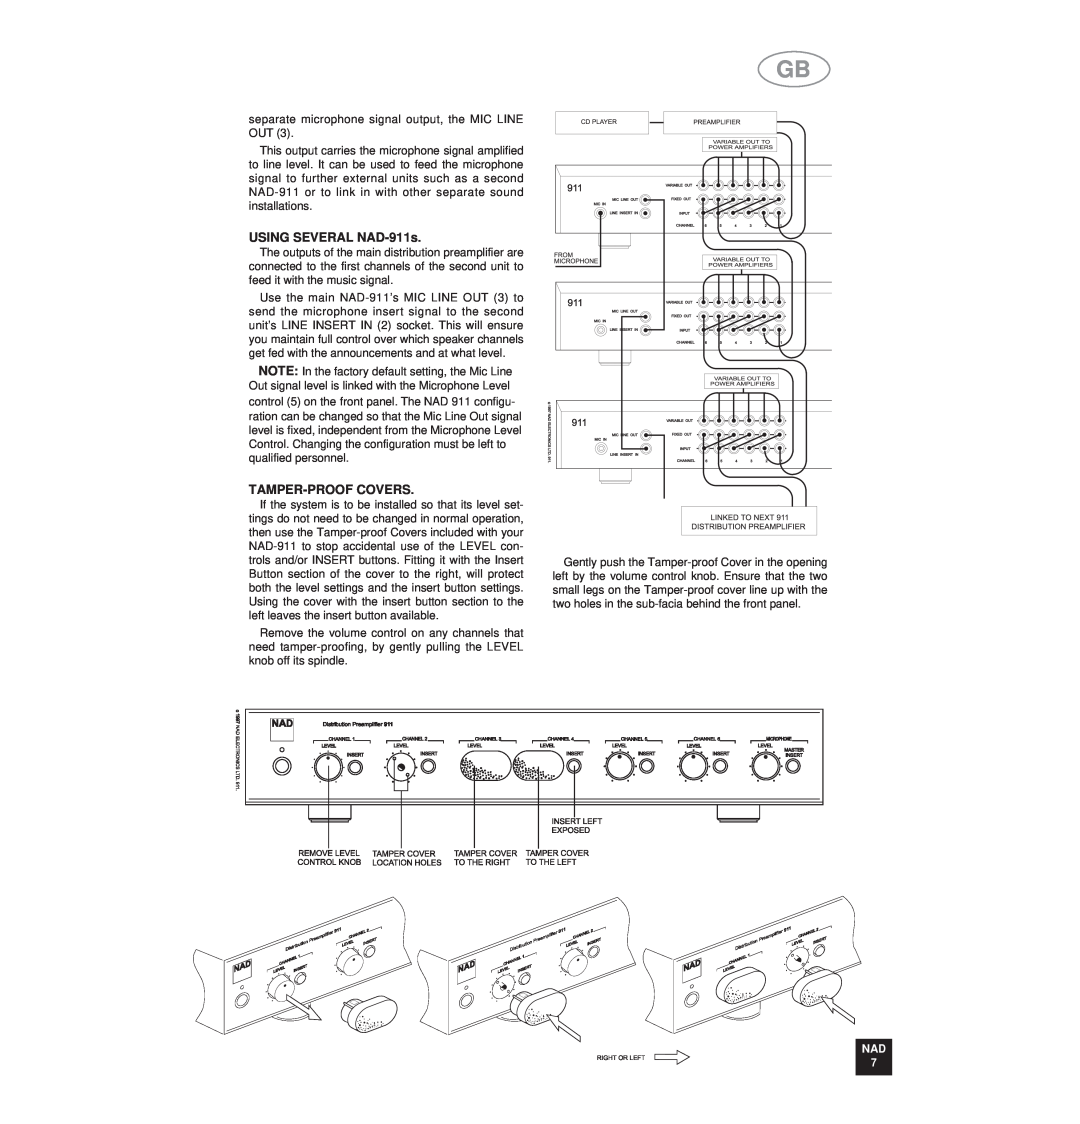 NAD NAD 911 owner manual USING SEVERAL NAD-911s, Tamper-Proofcovers, Nad 